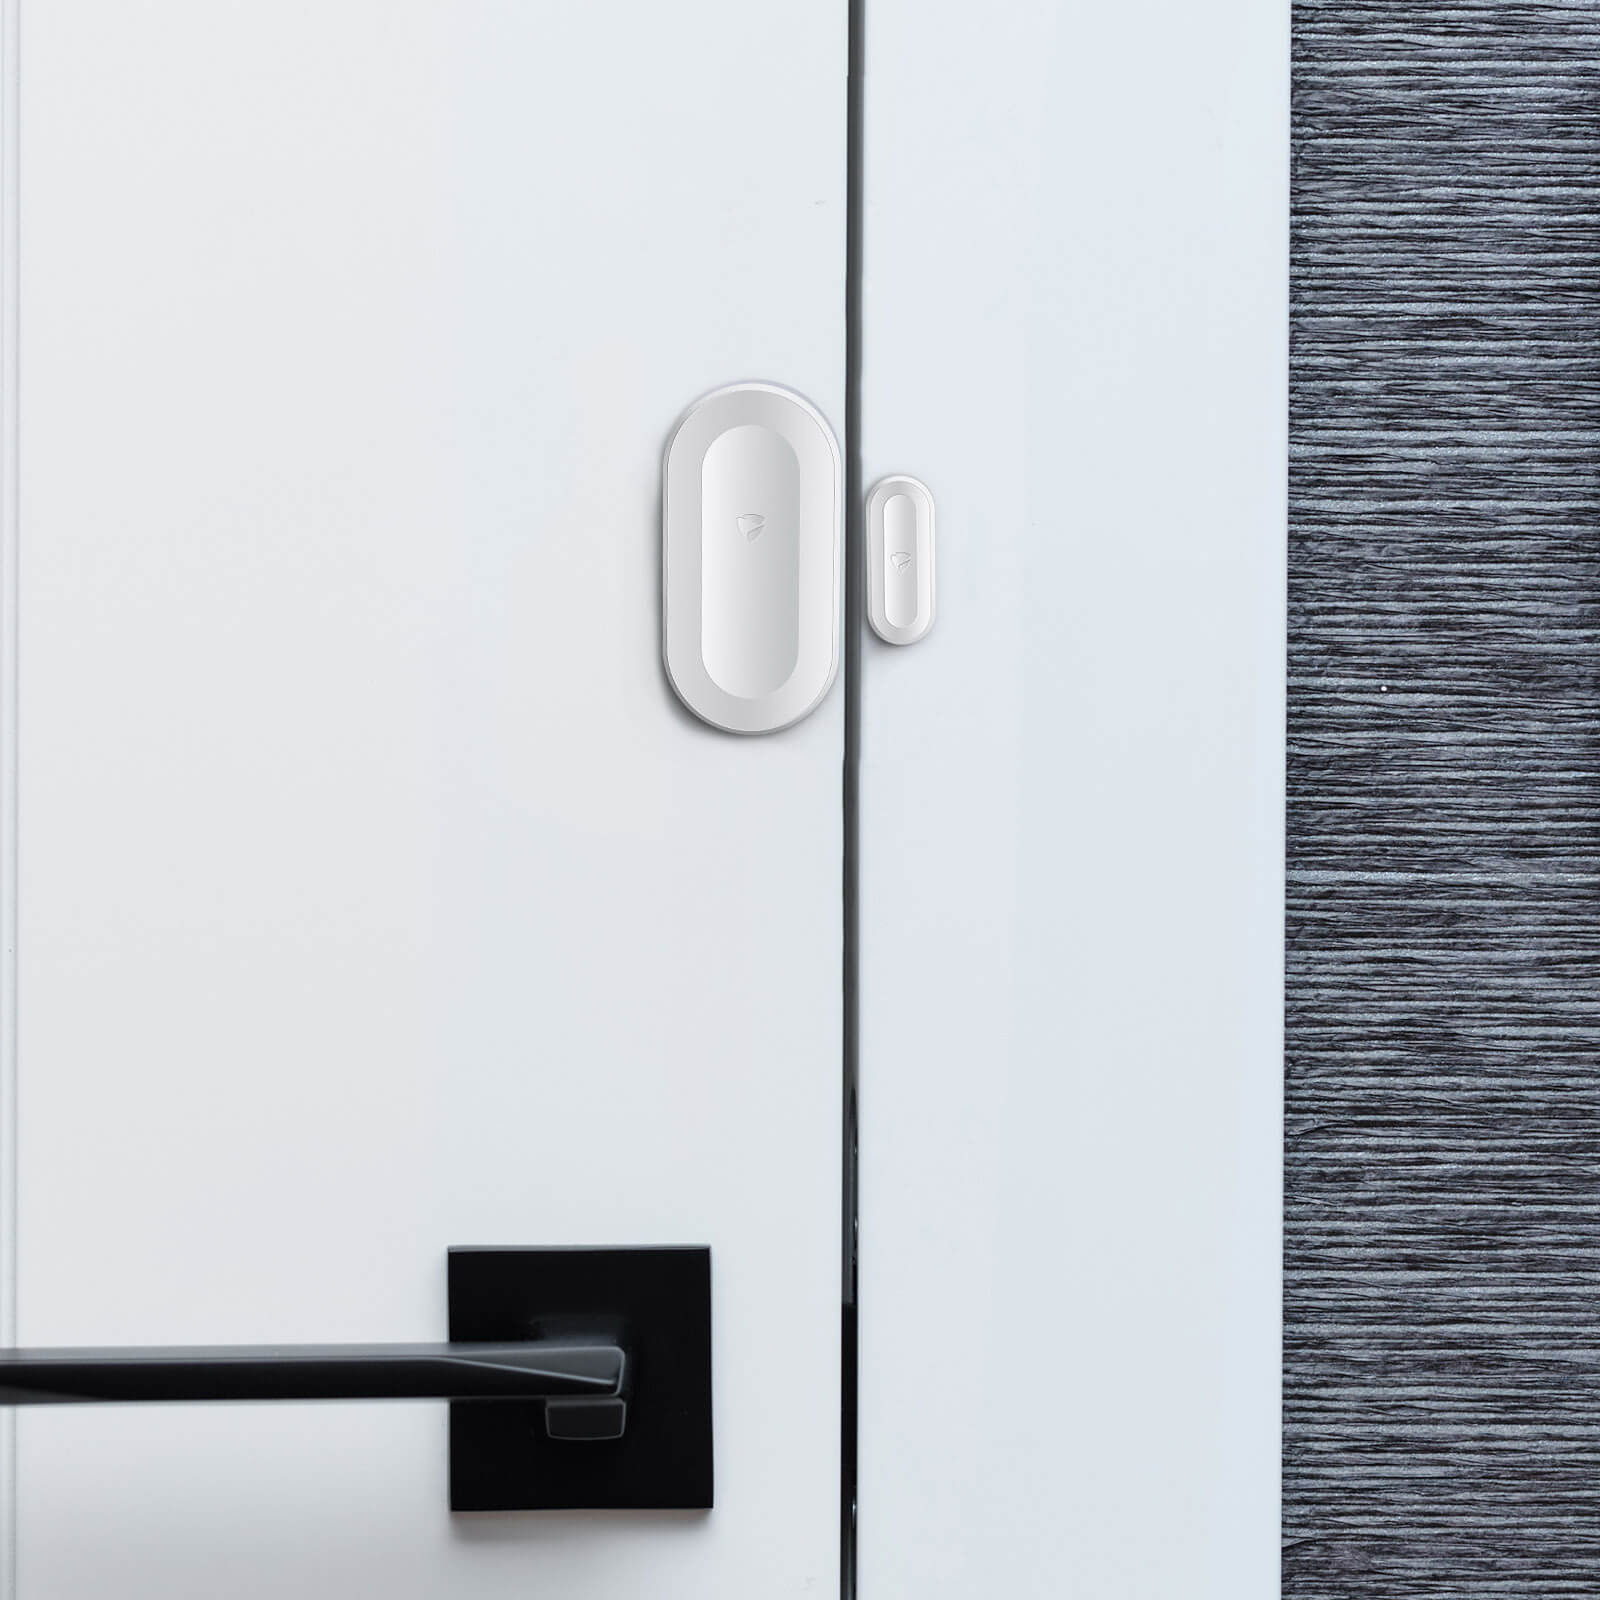 A SECURAM white door handle with a black handle.